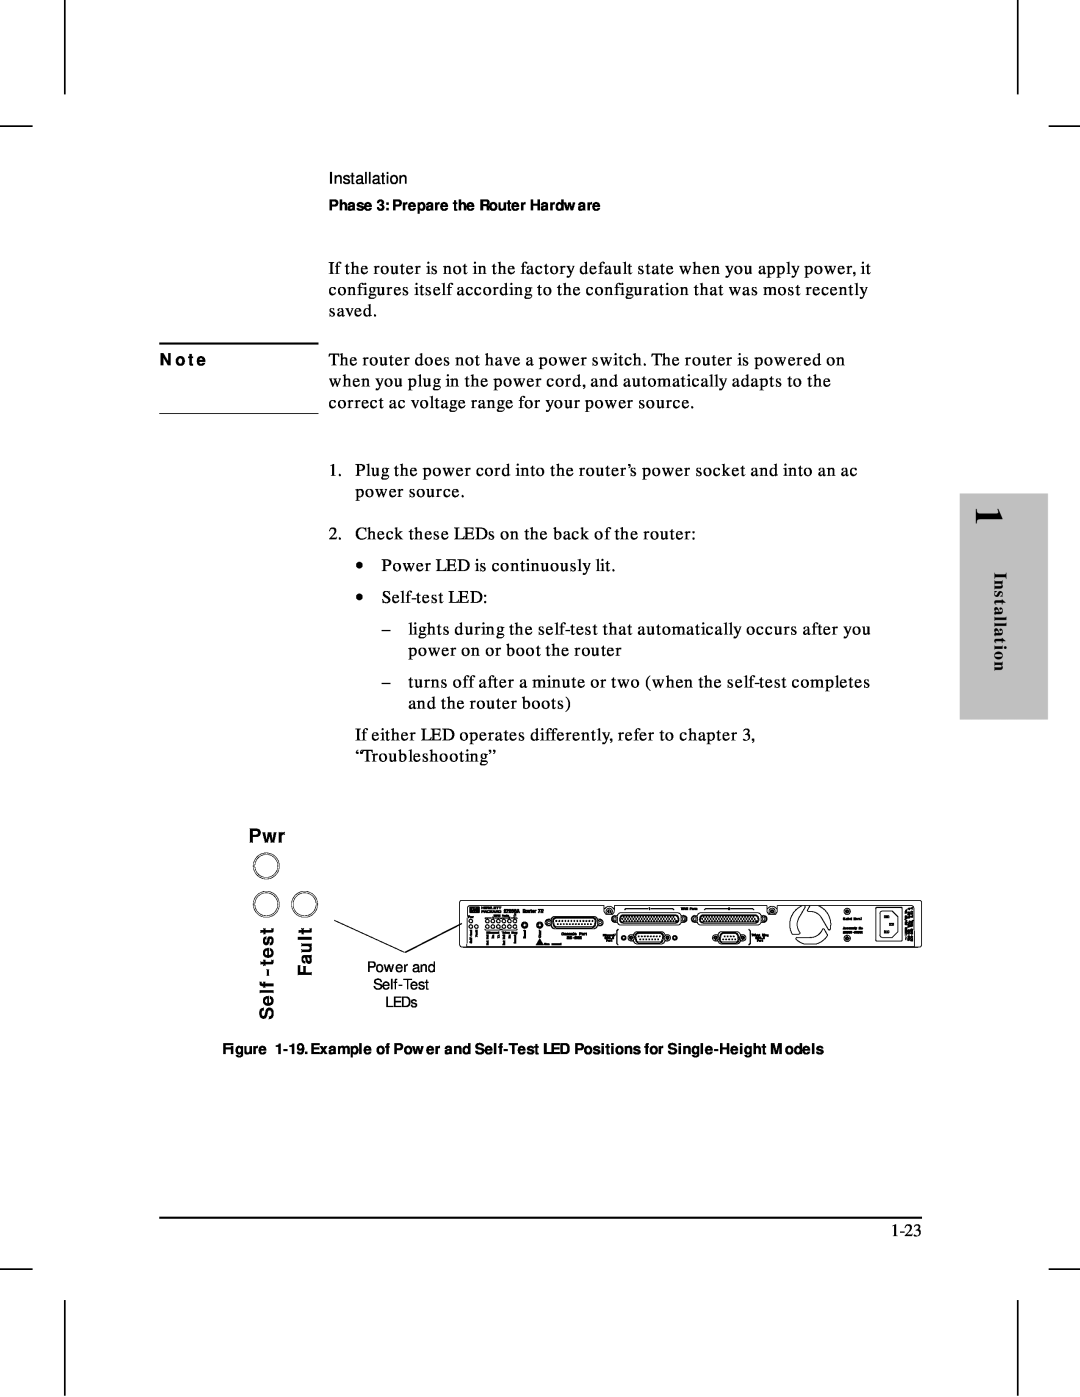 HP 480 manual N o t e, Phase 3 Prepare the Router Hardware, saved 